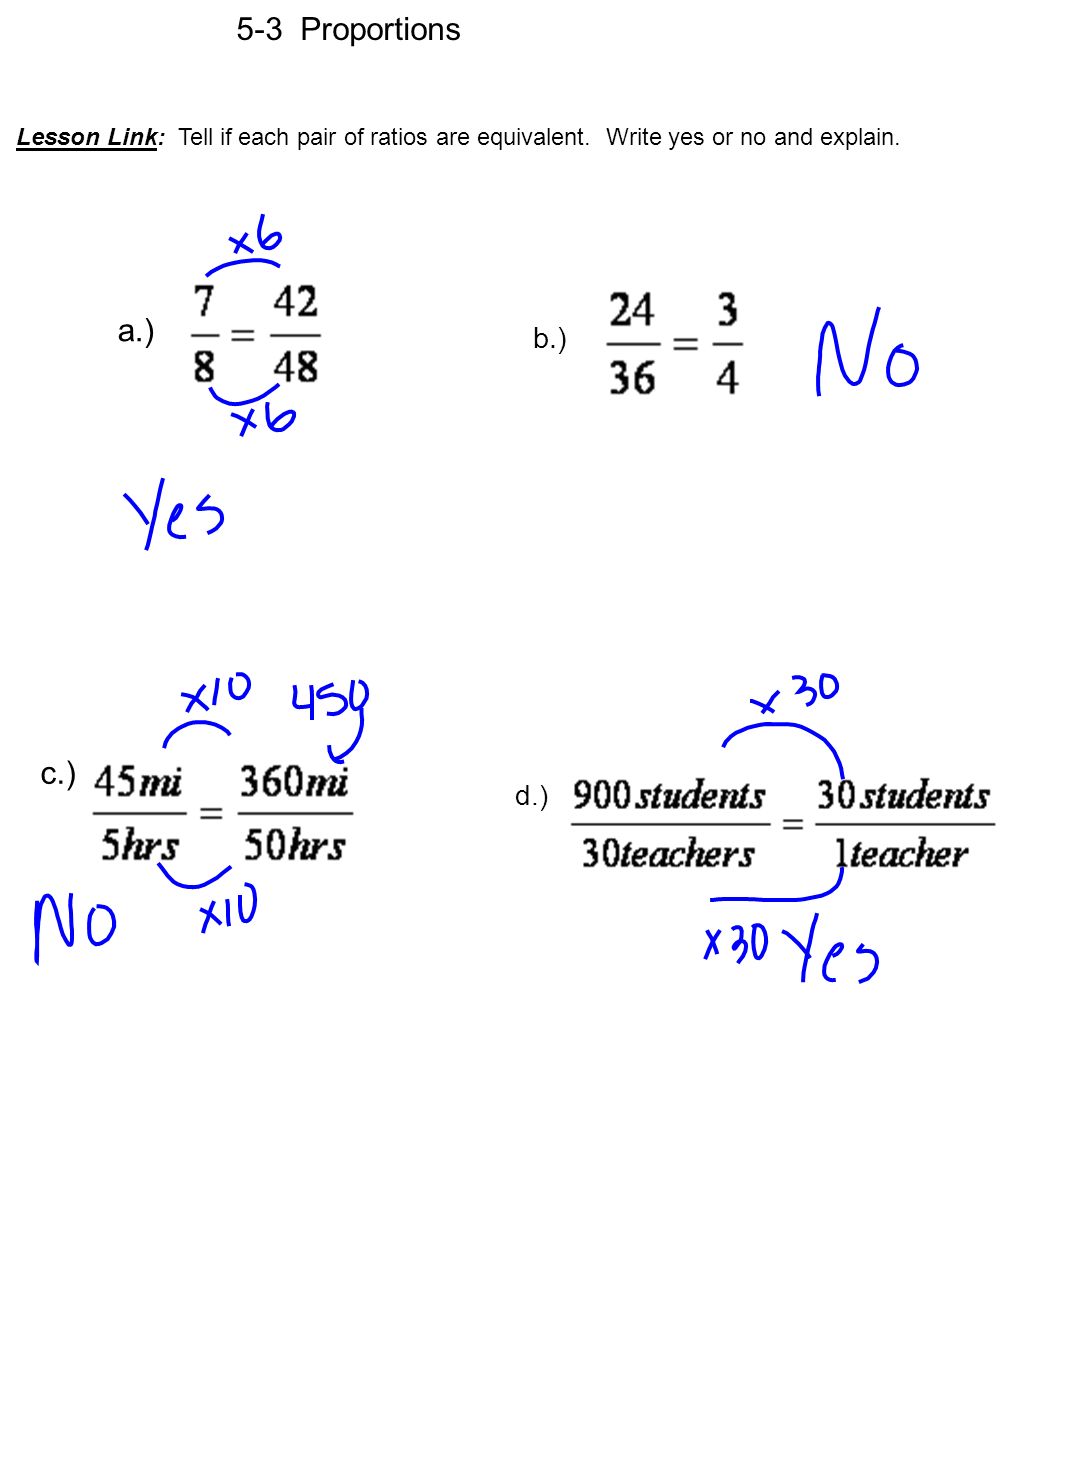 27-27 Proportions Lesson Link: Tell if each pair of ratios are